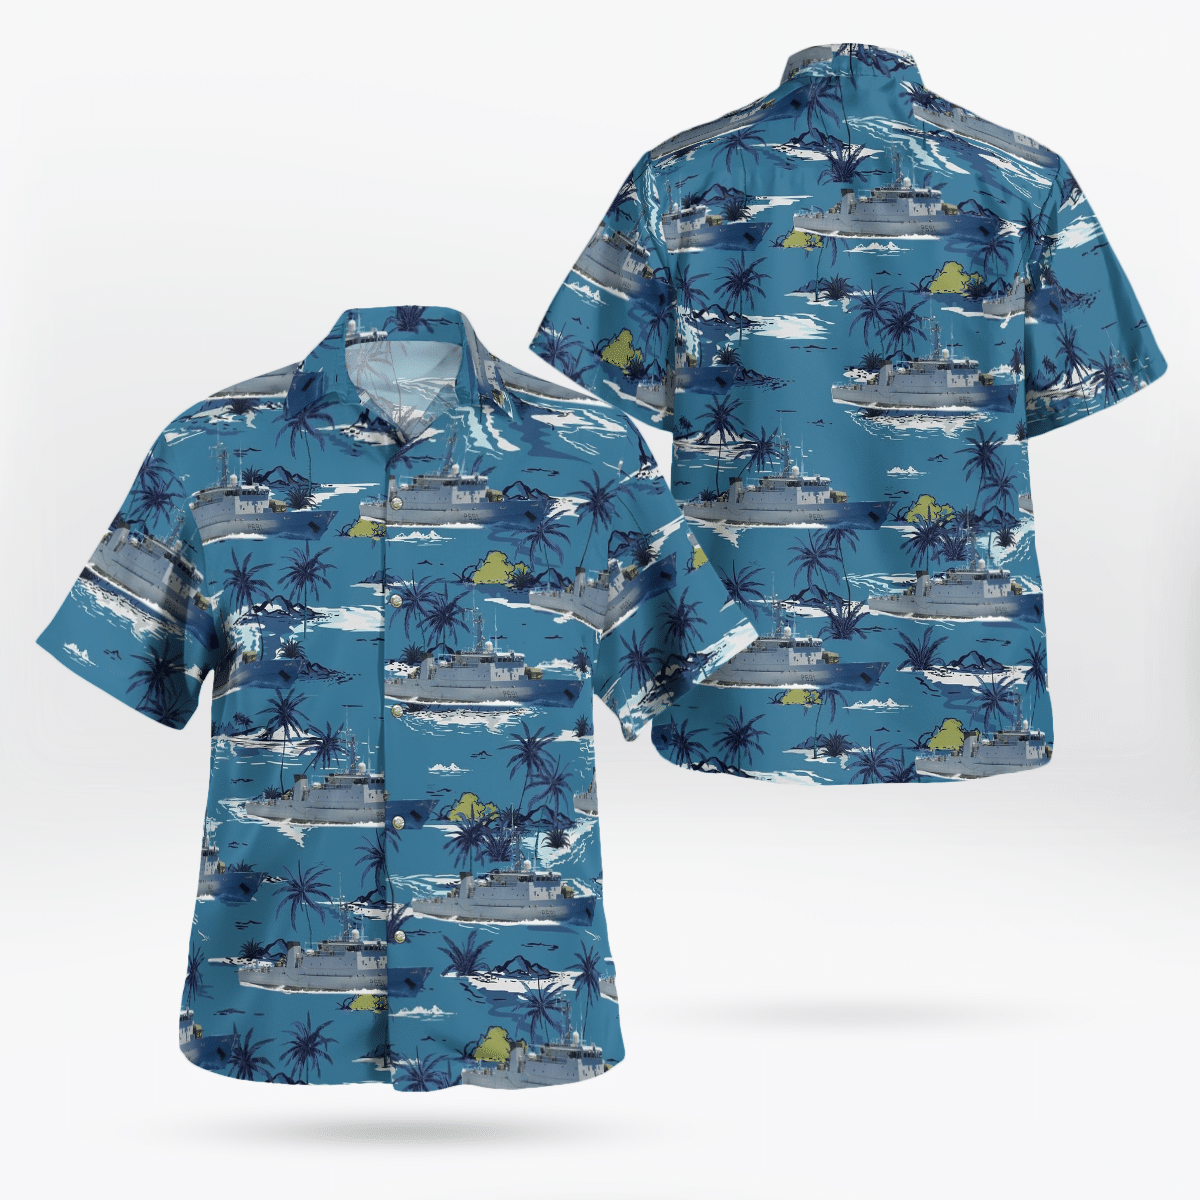 Shop now to find the perfect Hawaii Shirt for your hobby 15